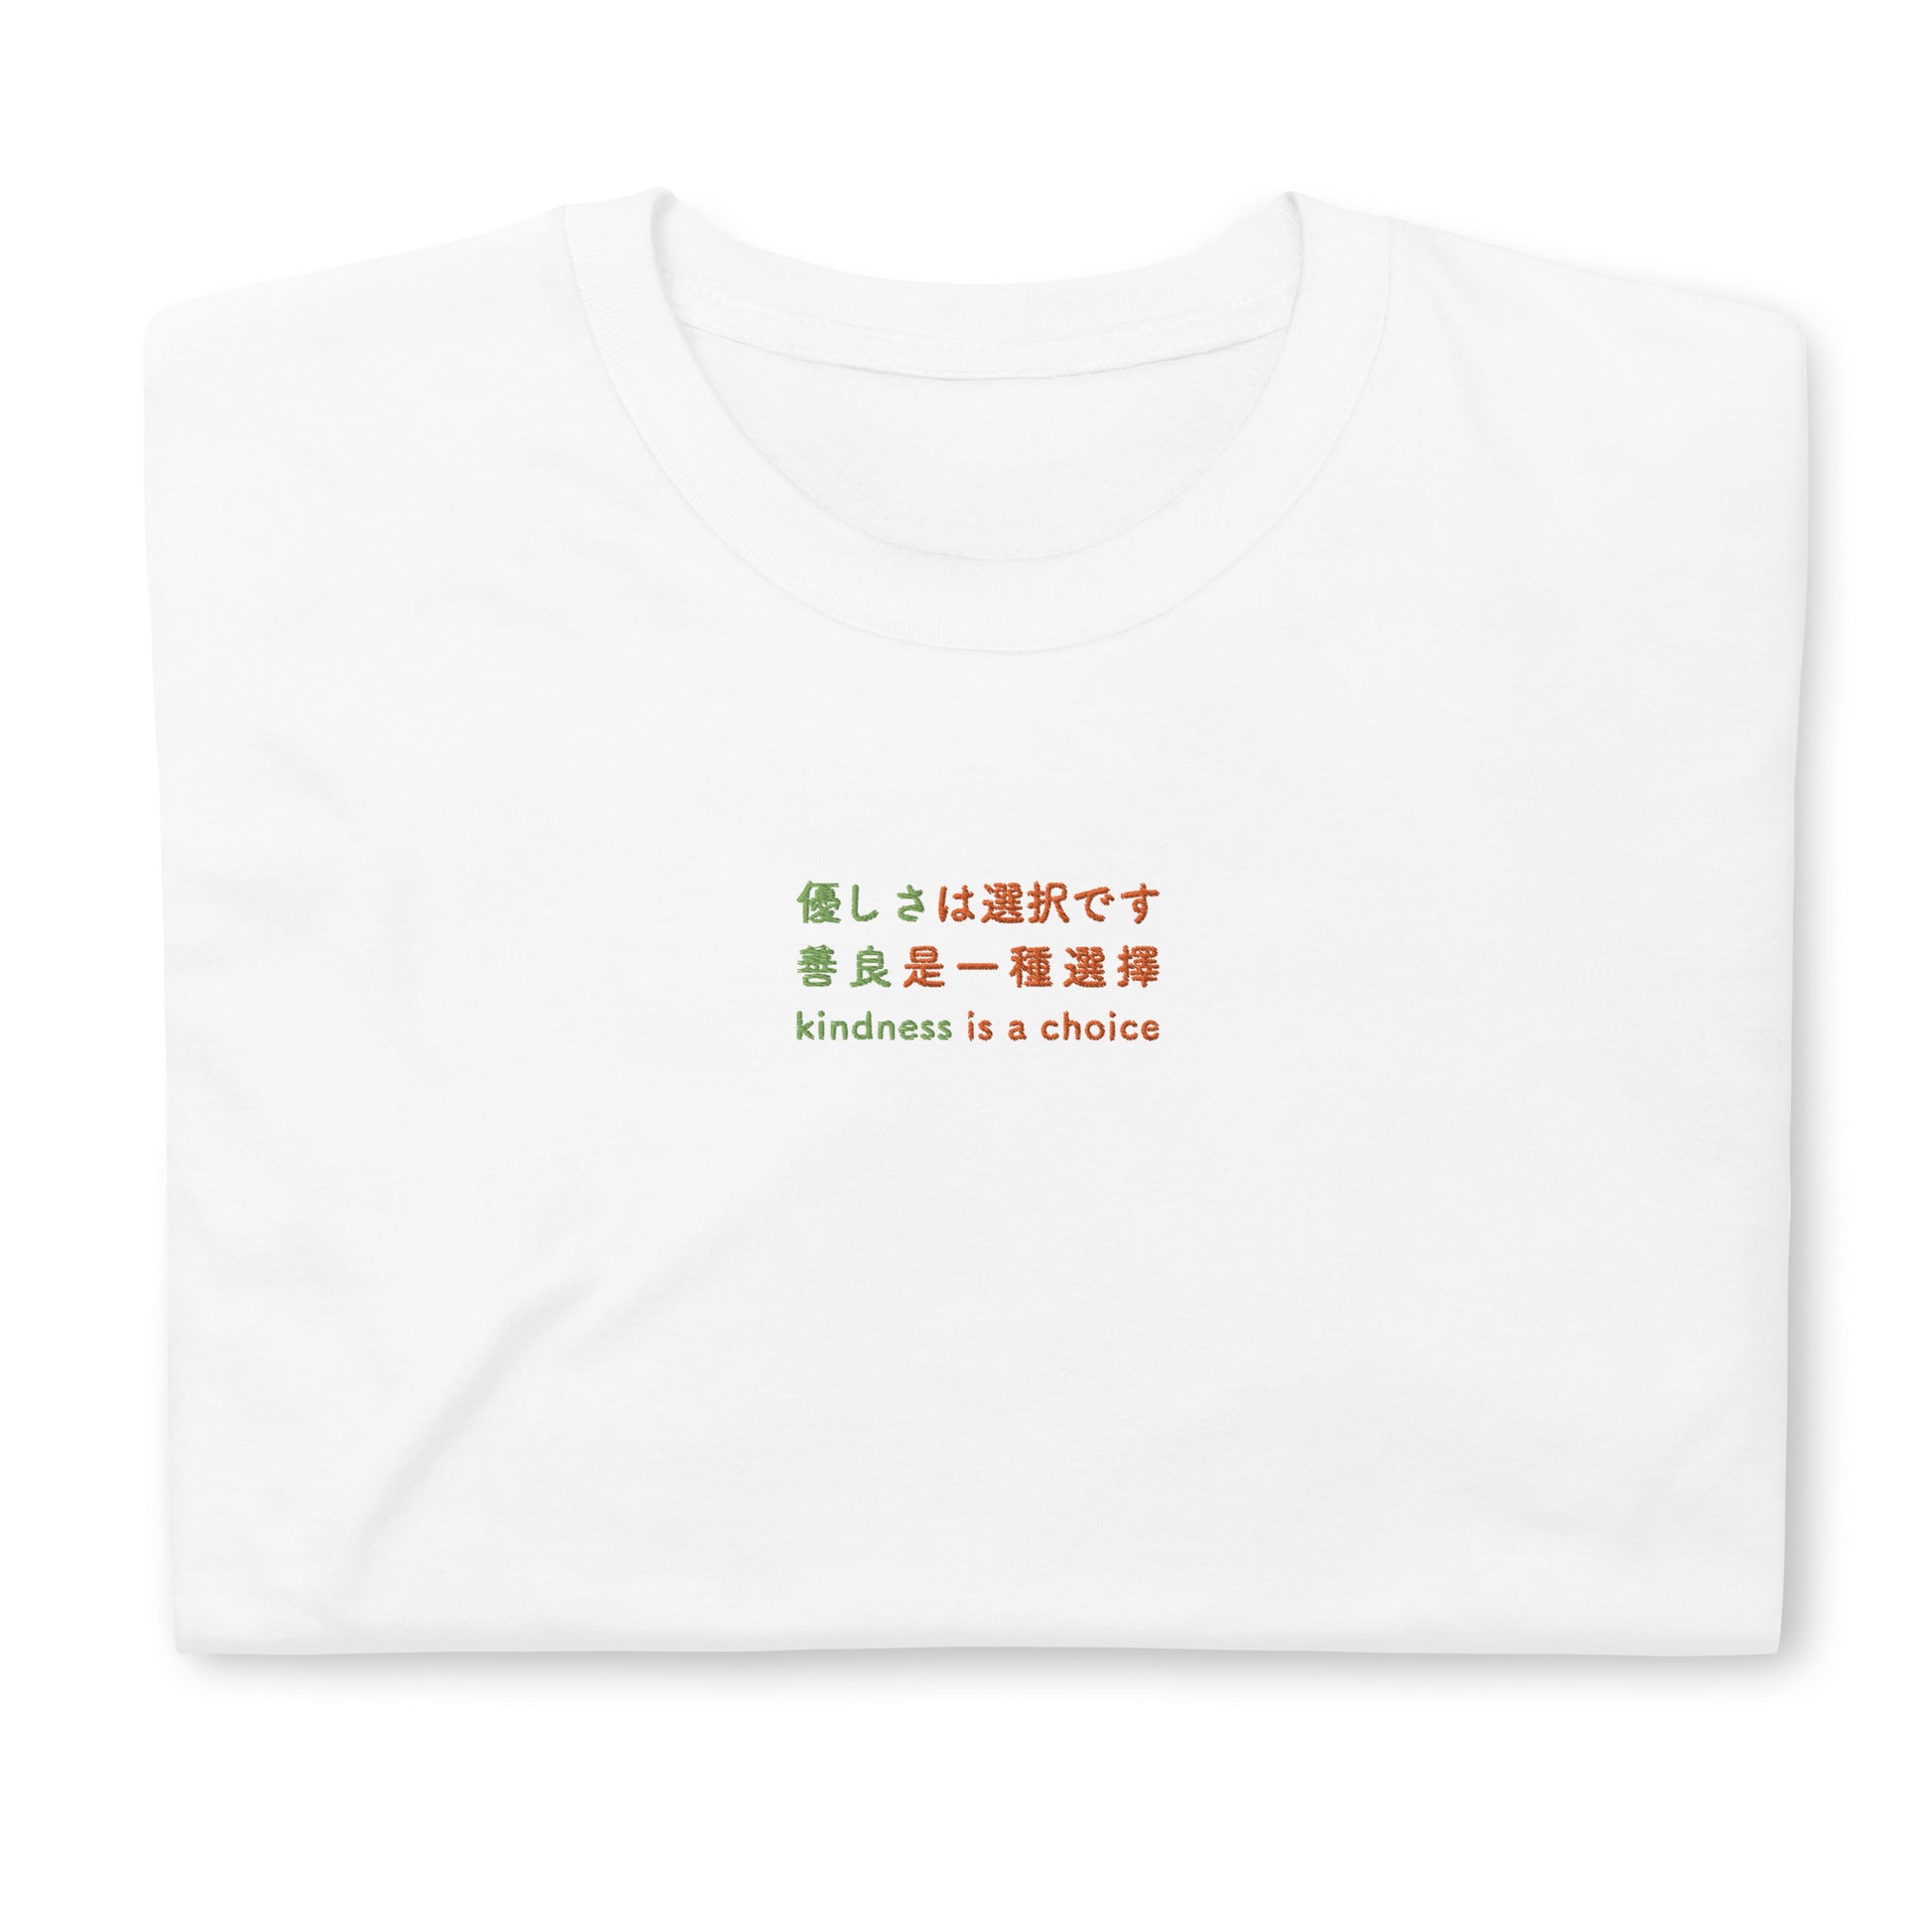 White High Quality Tee - Front Design with an Green, Orange Embroidery "Kindness is a Choice" in Japanese,Chinese and English